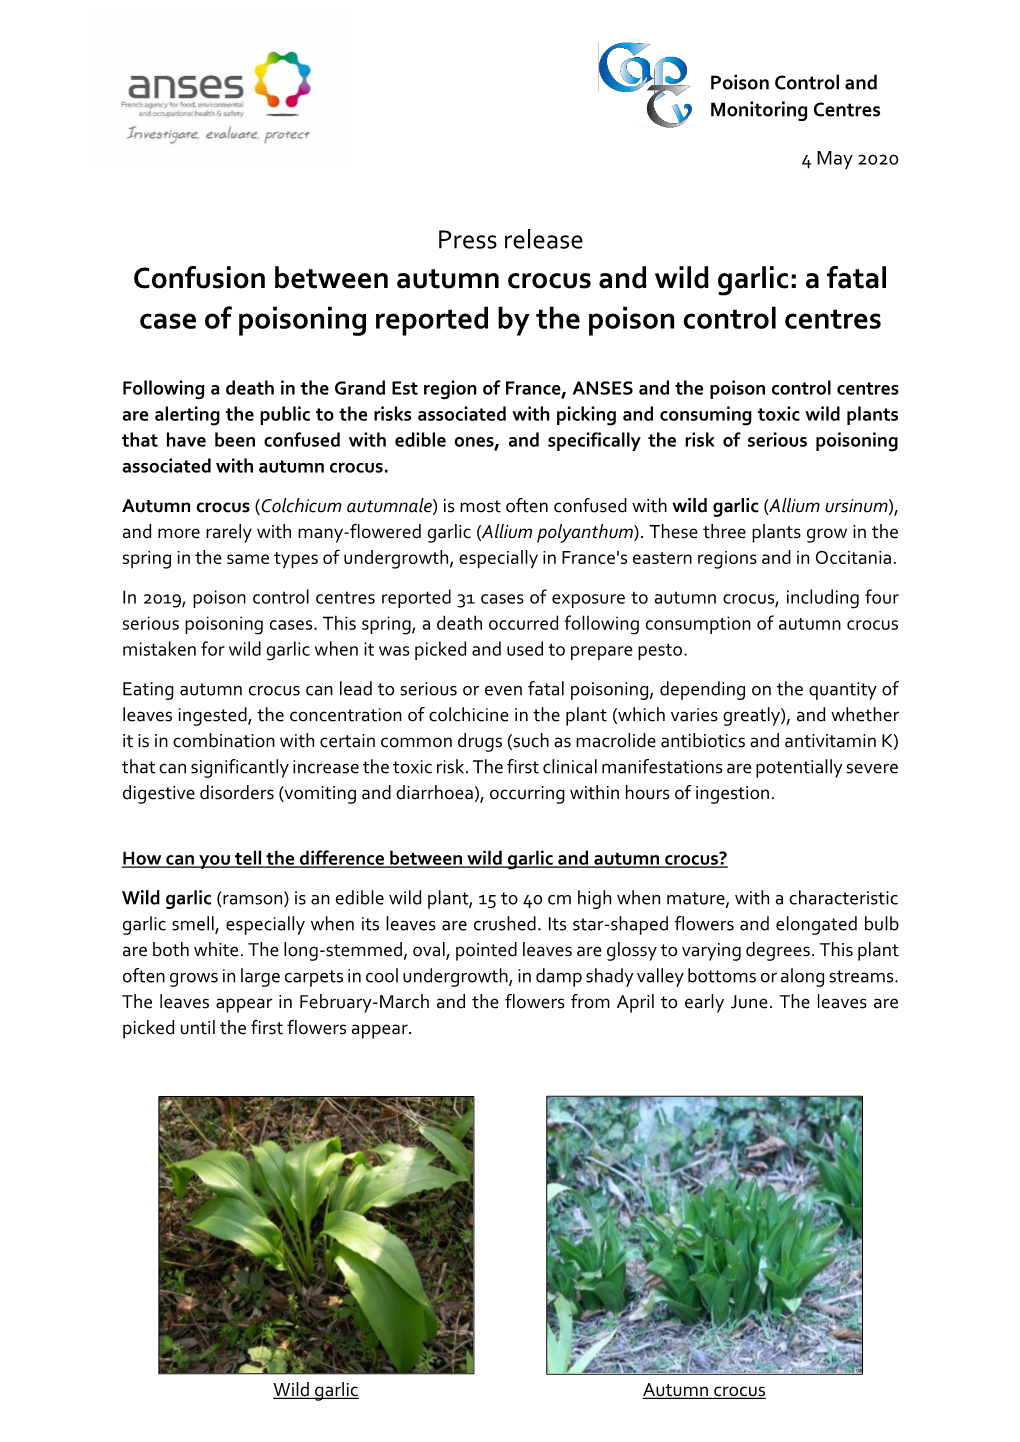 Confusion Between Autumn Crocus and Wild Garlic: a Fatal Case of Poisoning Reported by the Poison Control Centres